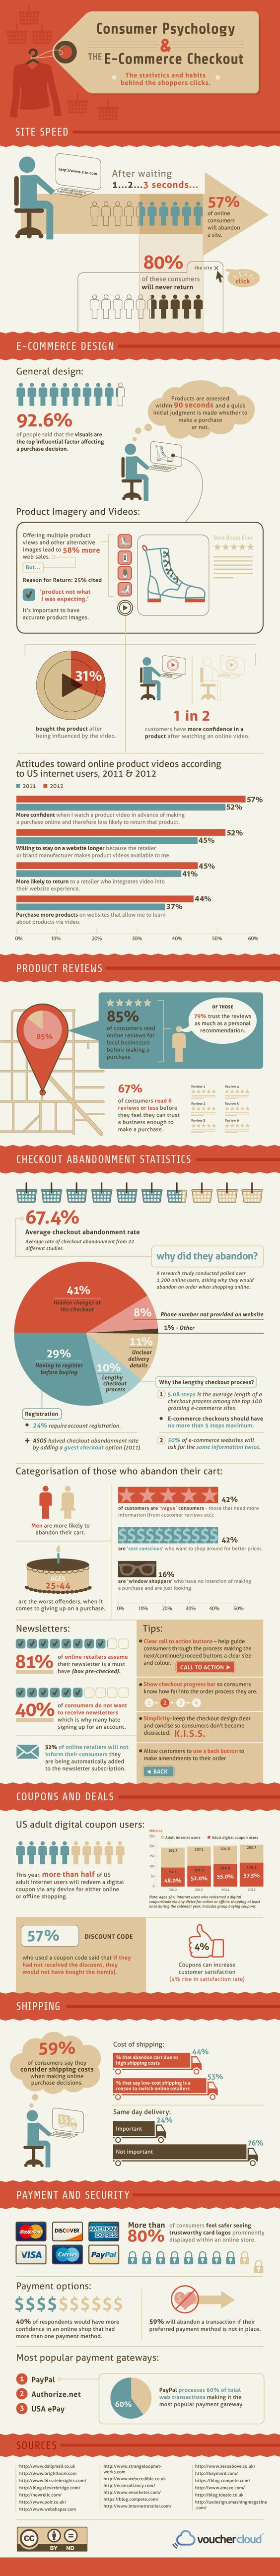 Consumer Psychology and the E-Commerce Checkout #Infographic #eCommerce #Marketing